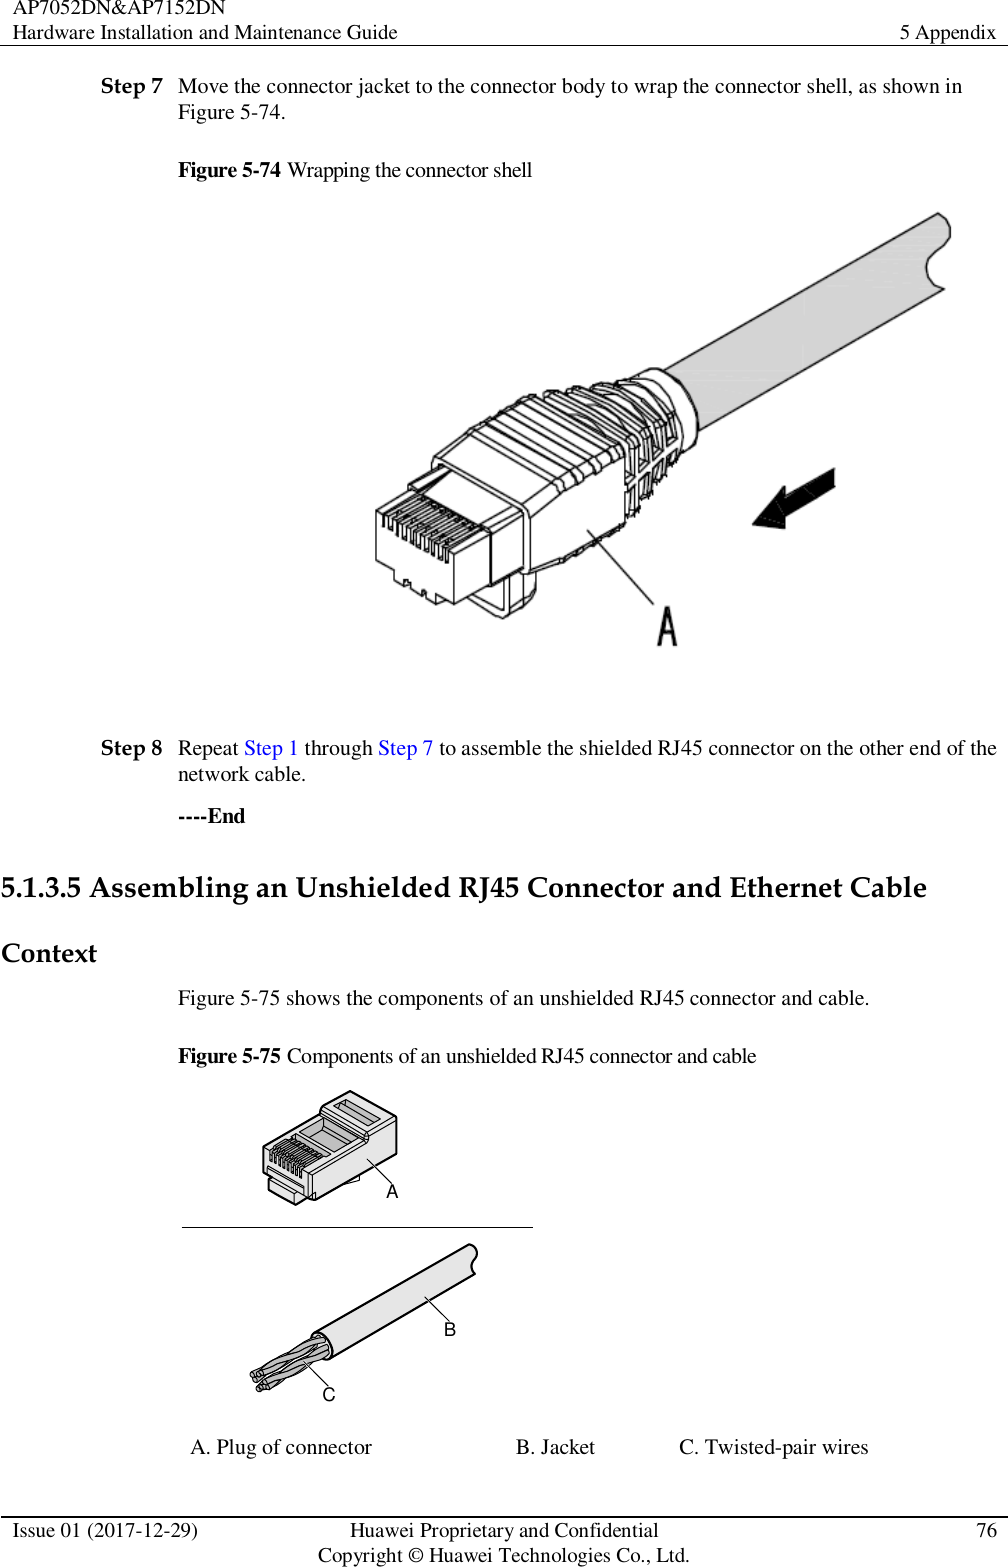 AP7052DN&amp;AP7152DN Hardware Installation and Maintenance Guide 5 Appendix  Issue 01 (2017-12-29) Huawei Proprietary and Confidential                                     Copyright © Huawei Technologies Co., Ltd. 76  Step 7 Move the connector jacket to the connector body to wrap the connector shell, as shown in Figure 5-74. Figure 5-74 Wrapping the connector shell   Step 8 Repeat Step 1 through Step 7 to assemble the shielded RJ45 connector on the other end of the network cable.   ----End 5.1.3.5 Assembling an Unshielded RJ45 Connector and Ethernet Cable Context Figure 5-75 shows the components of an unshielded RJ45 connector and cable. Figure 5-75 Components of an unshielded RJ45 connector and cable ABC A. Plug of connector B. Jacket C. Twisted-pair wires 